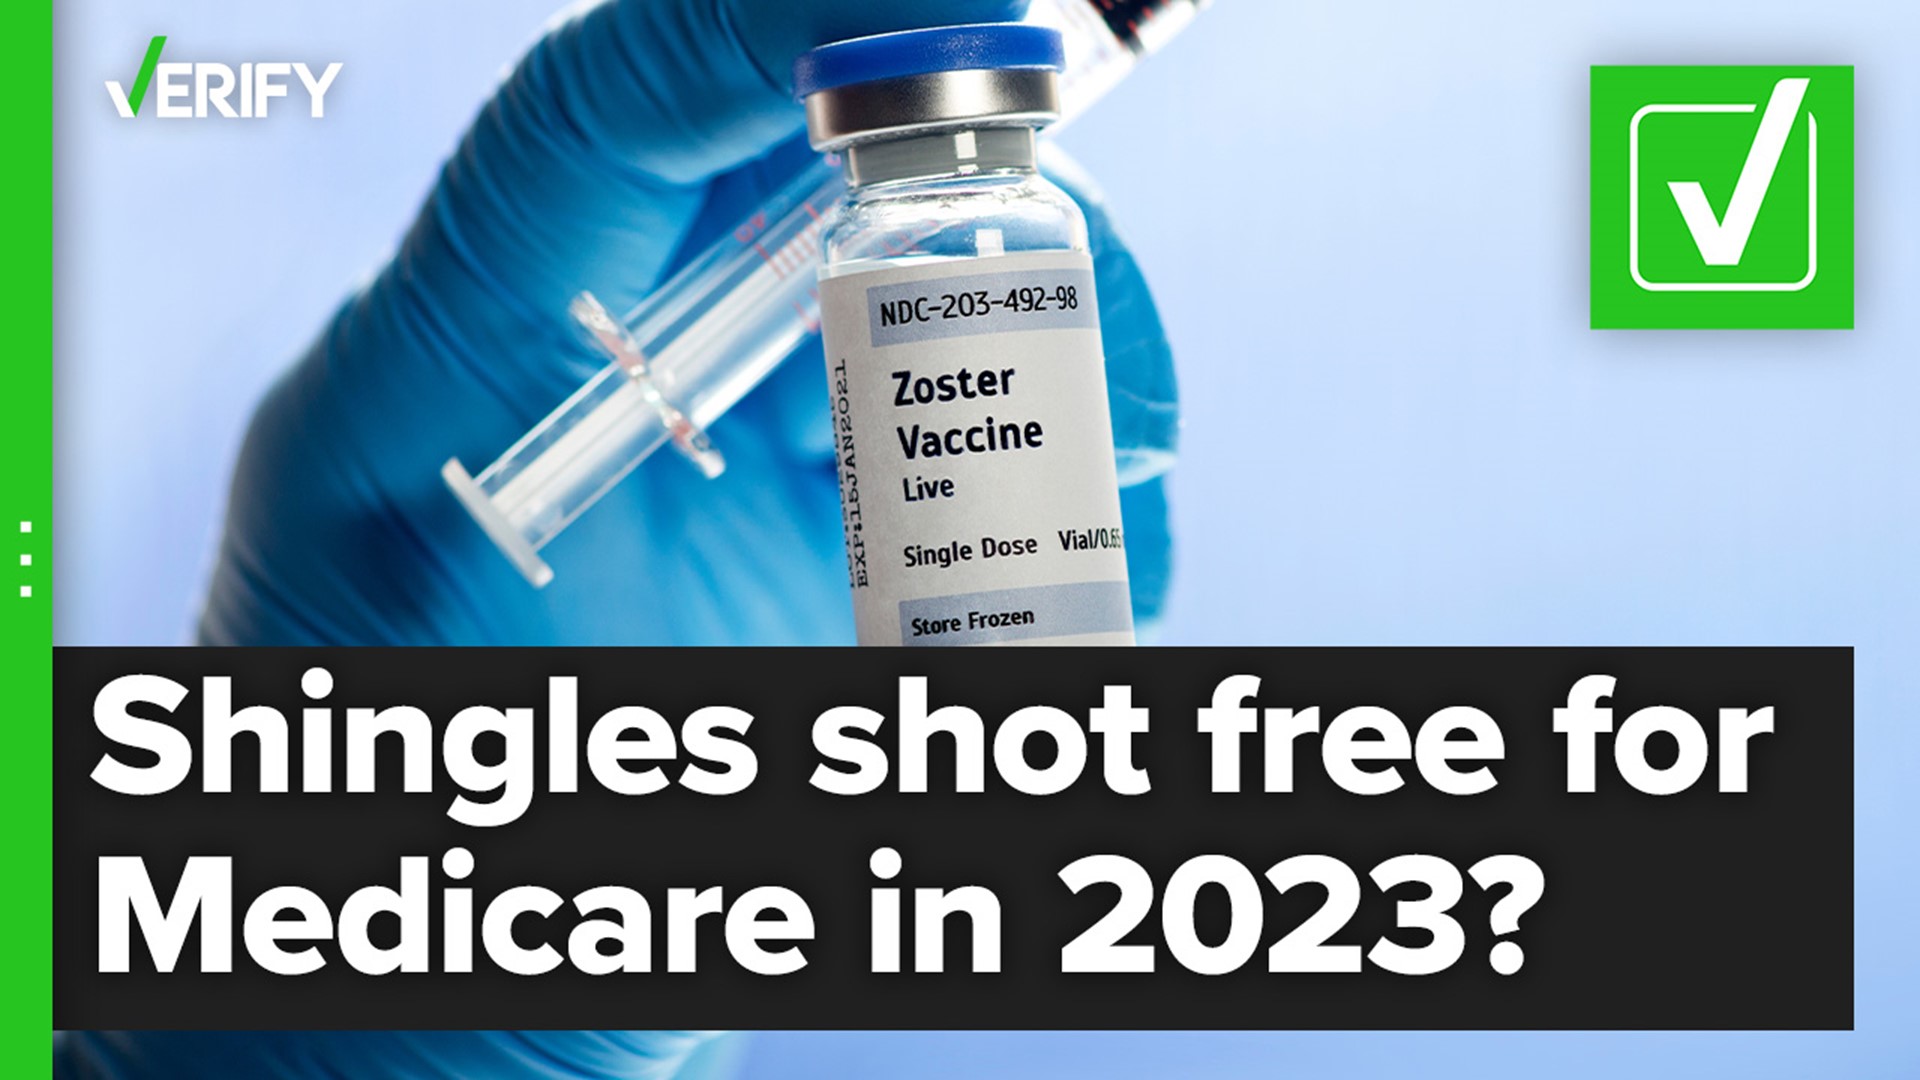 The shingles vaccine will be free for seniors with Medicare who have Part D prescription drug coverage beginning January 2023.